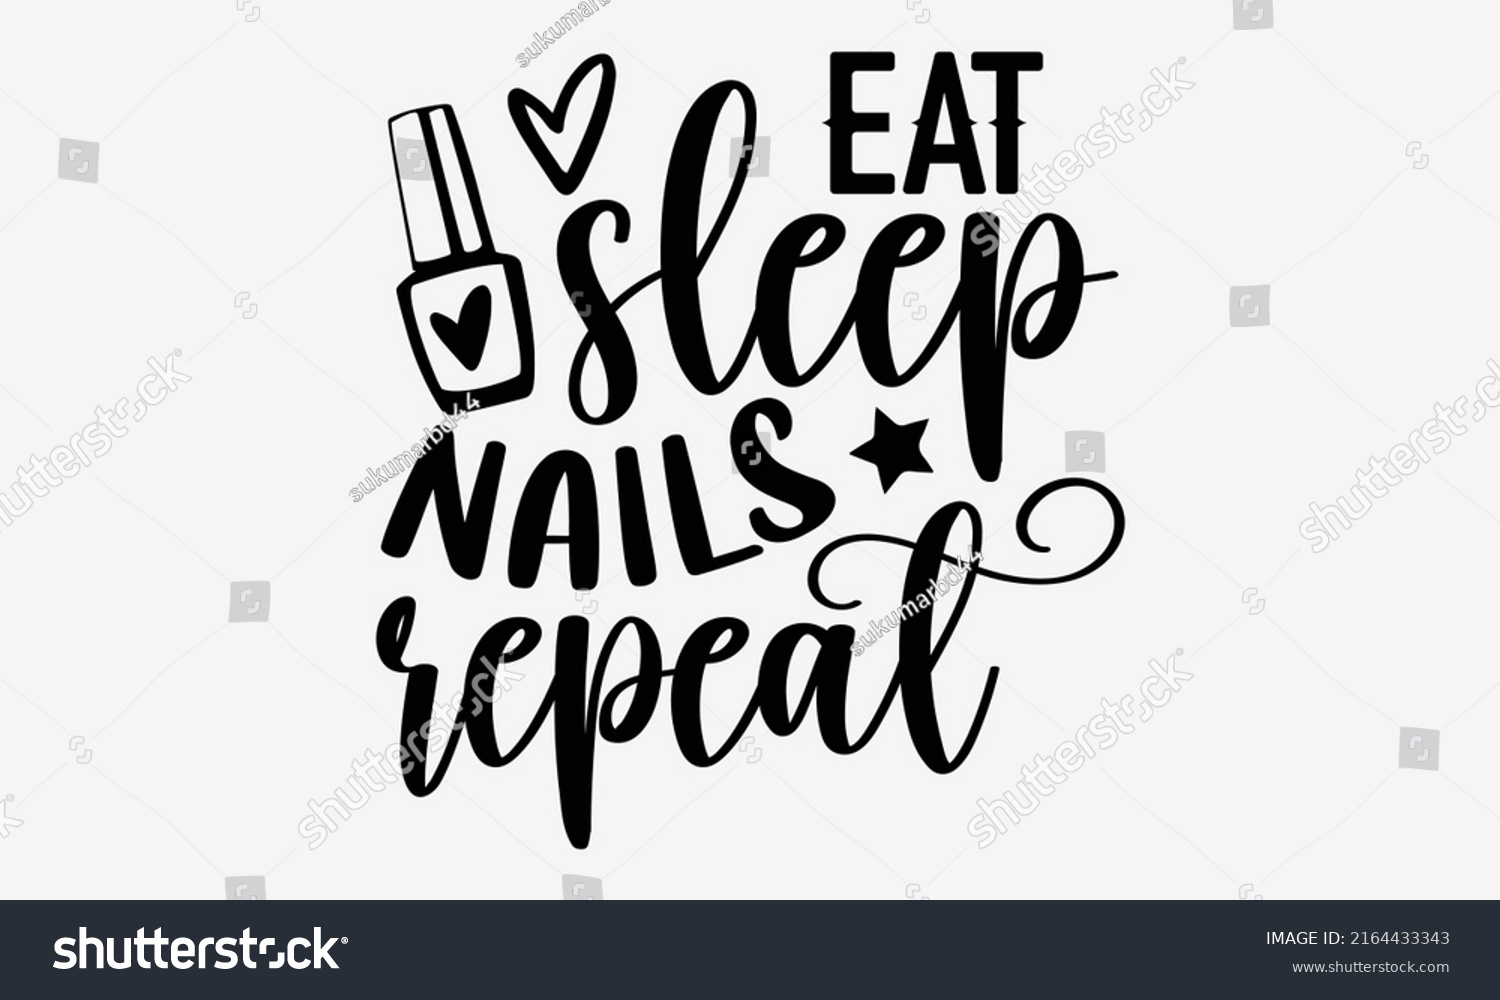 SVG of Eat sleep nails repeat - Nail Tech  t shirt design, Hand drawn lettering phrase, Calligraphy graphic design, SVG Files for Cutting Cricut and Silhouette svg